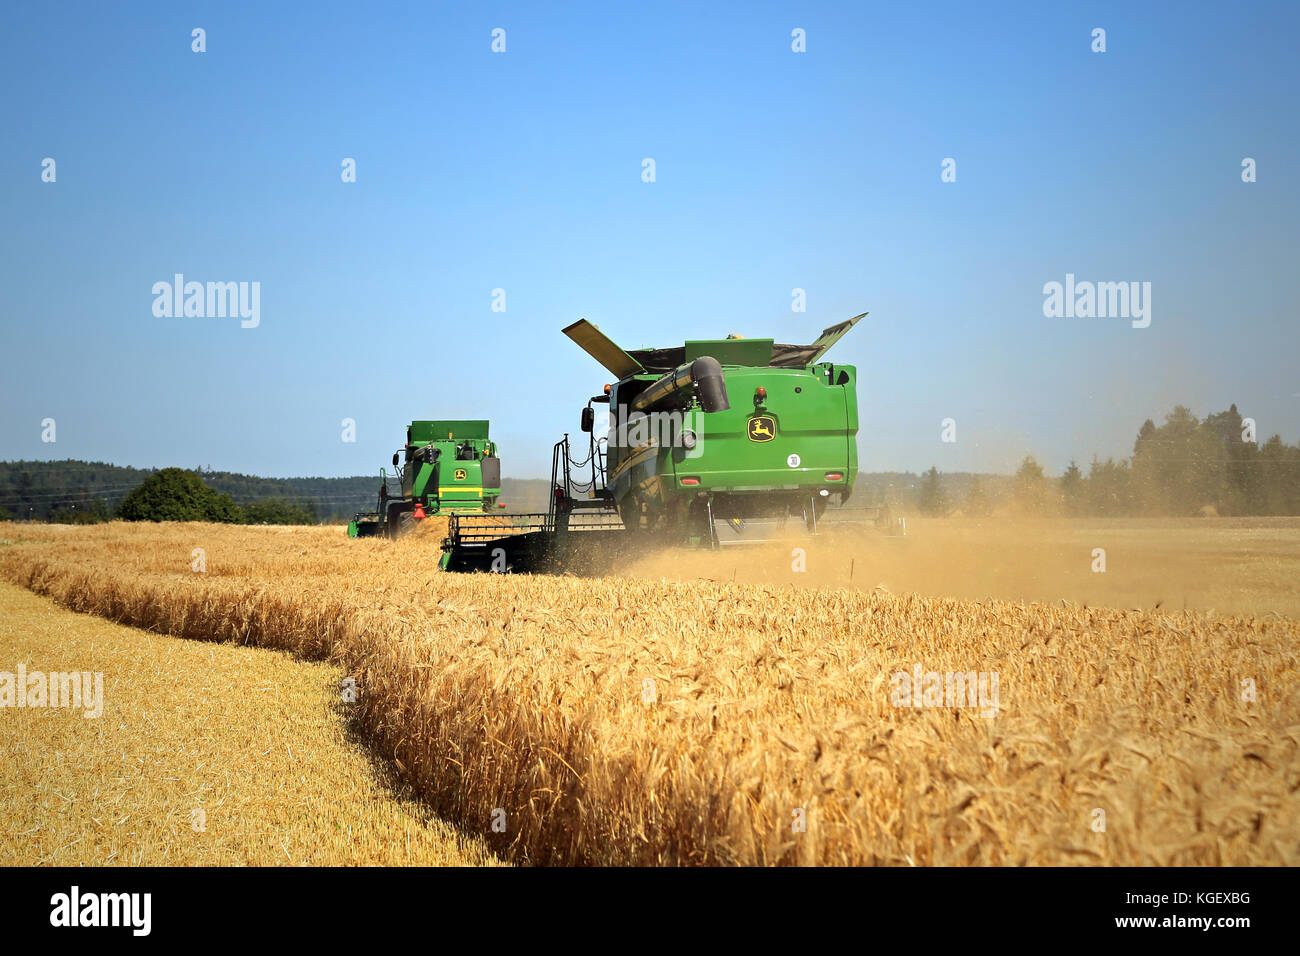 SALO, FINLAND - AUGUST 22, 2015: Two John Deere modern Combines harvest barley at Puontin Peltopaivat Agricultural Harvesting and Cultivating Show. Stock Photo